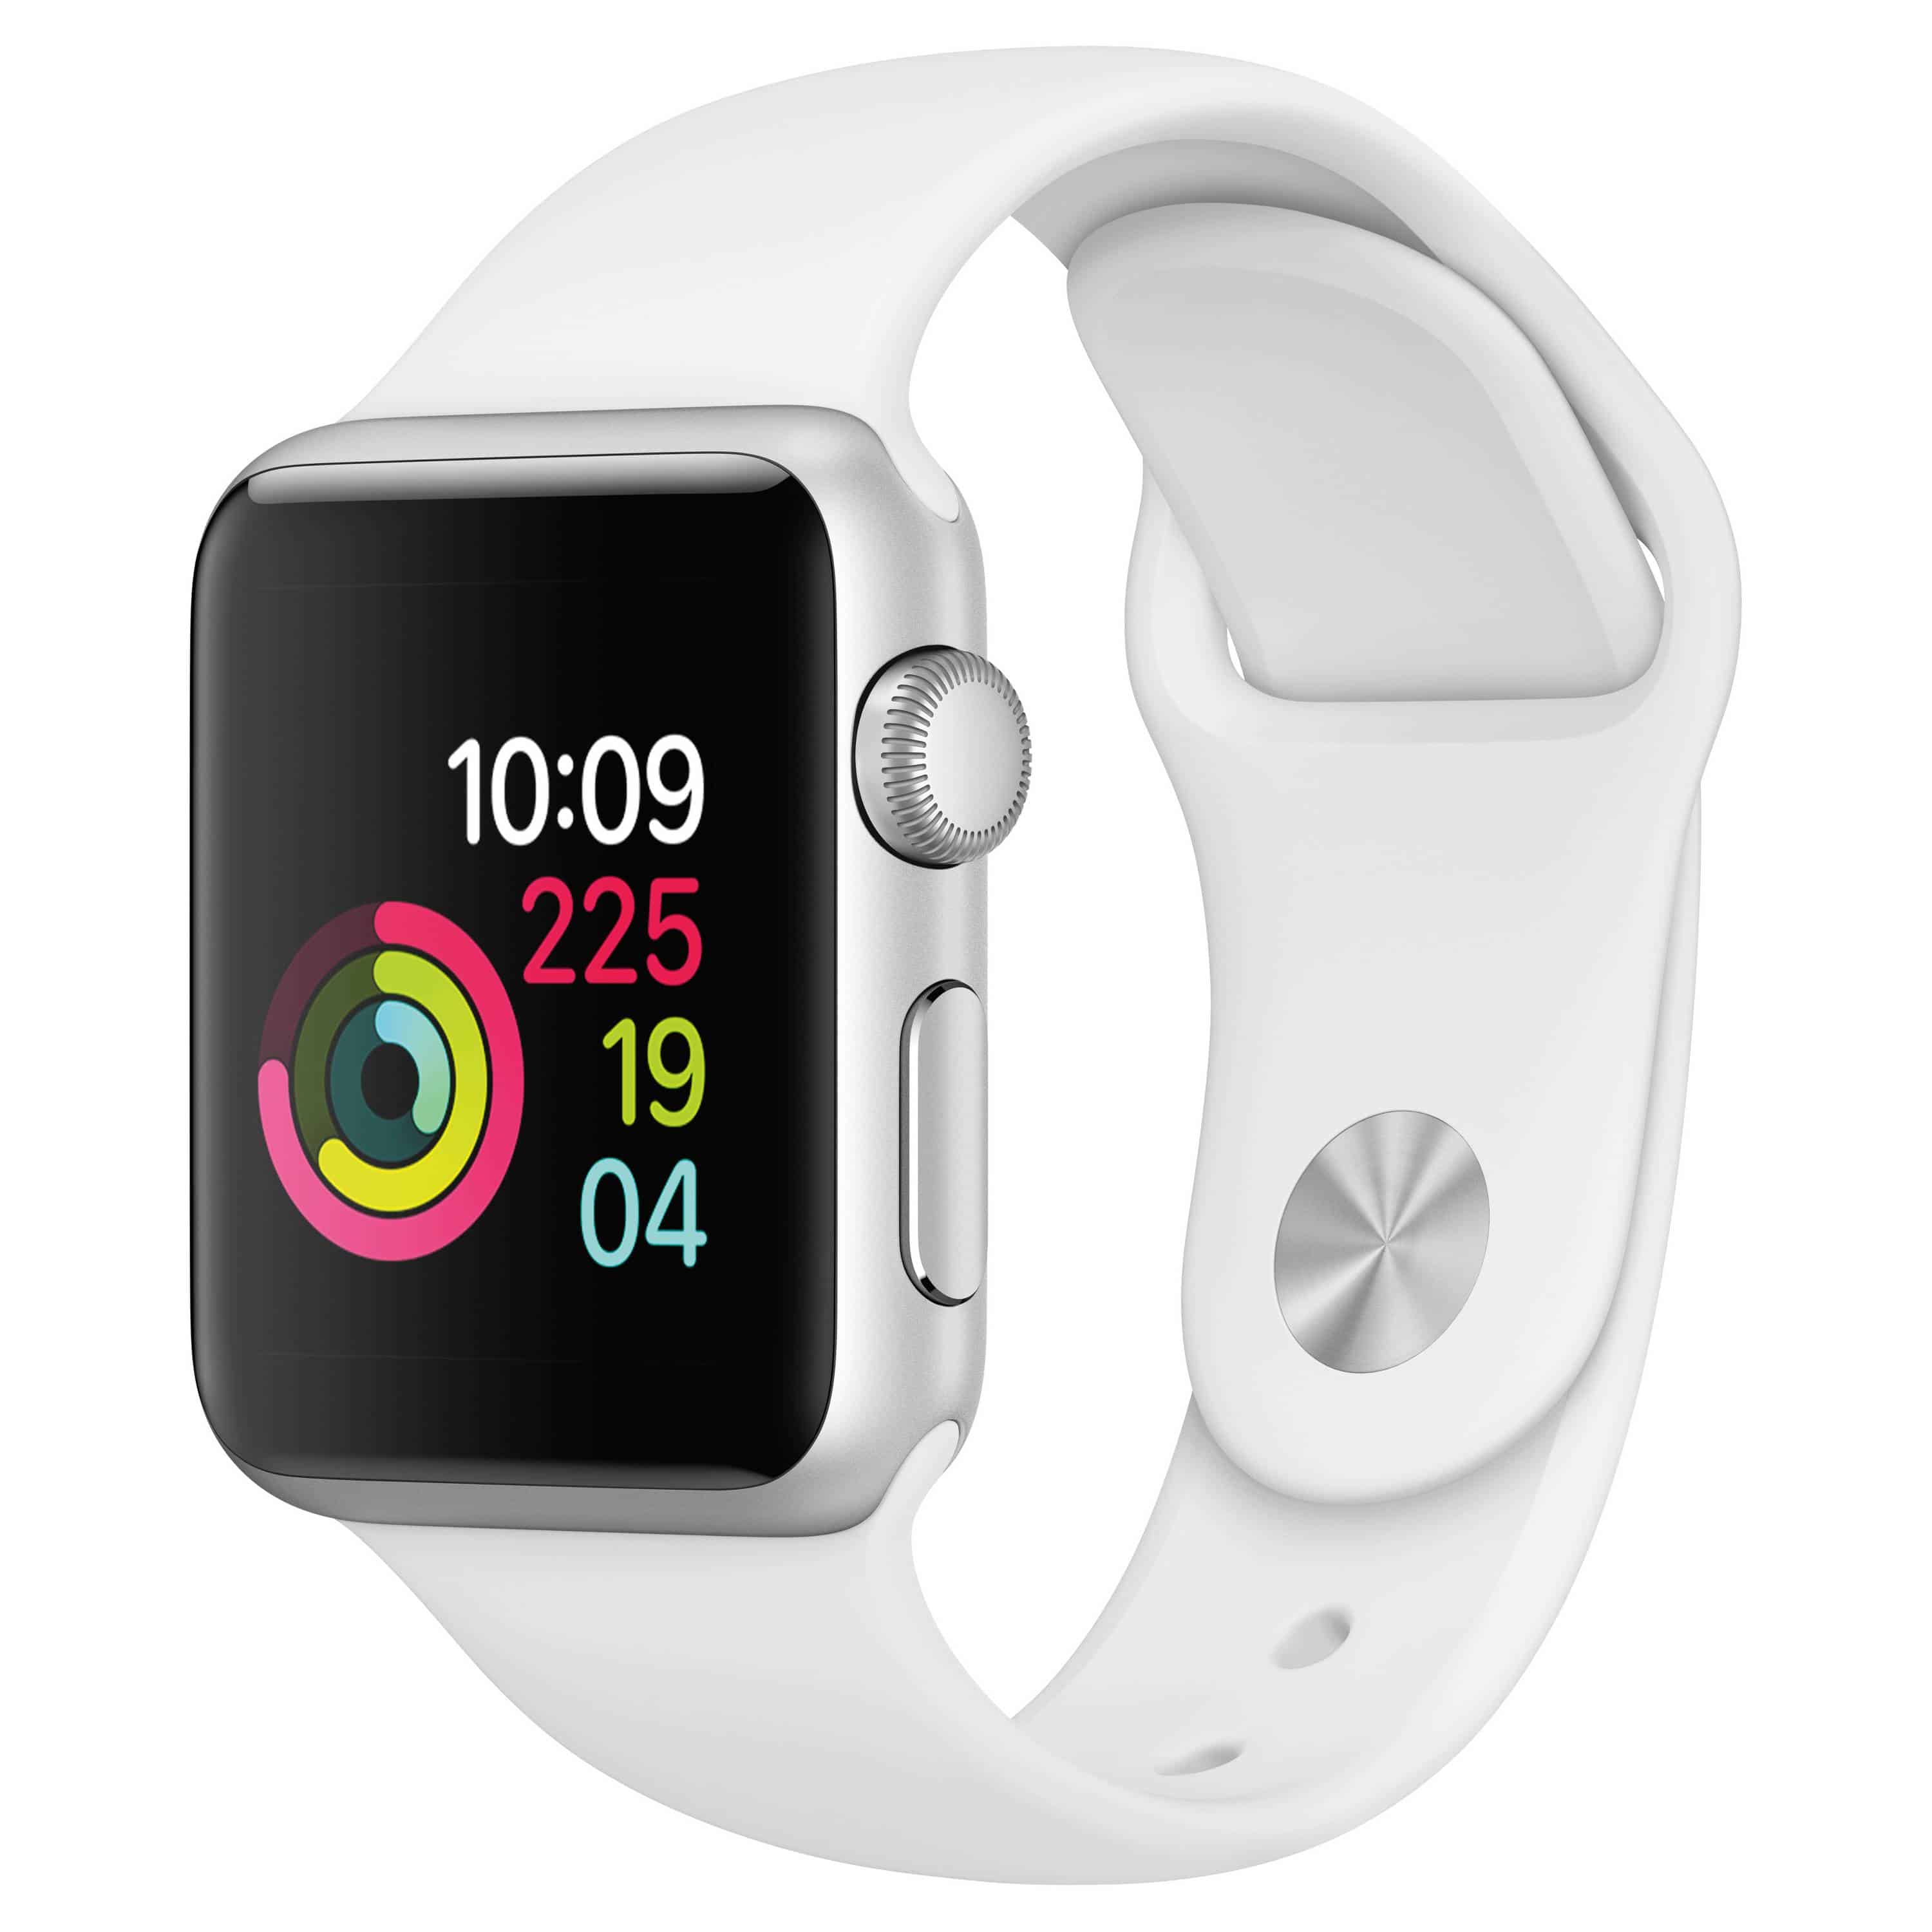 The Apple Watch Series 1 is on sale now at the best price we've seen.